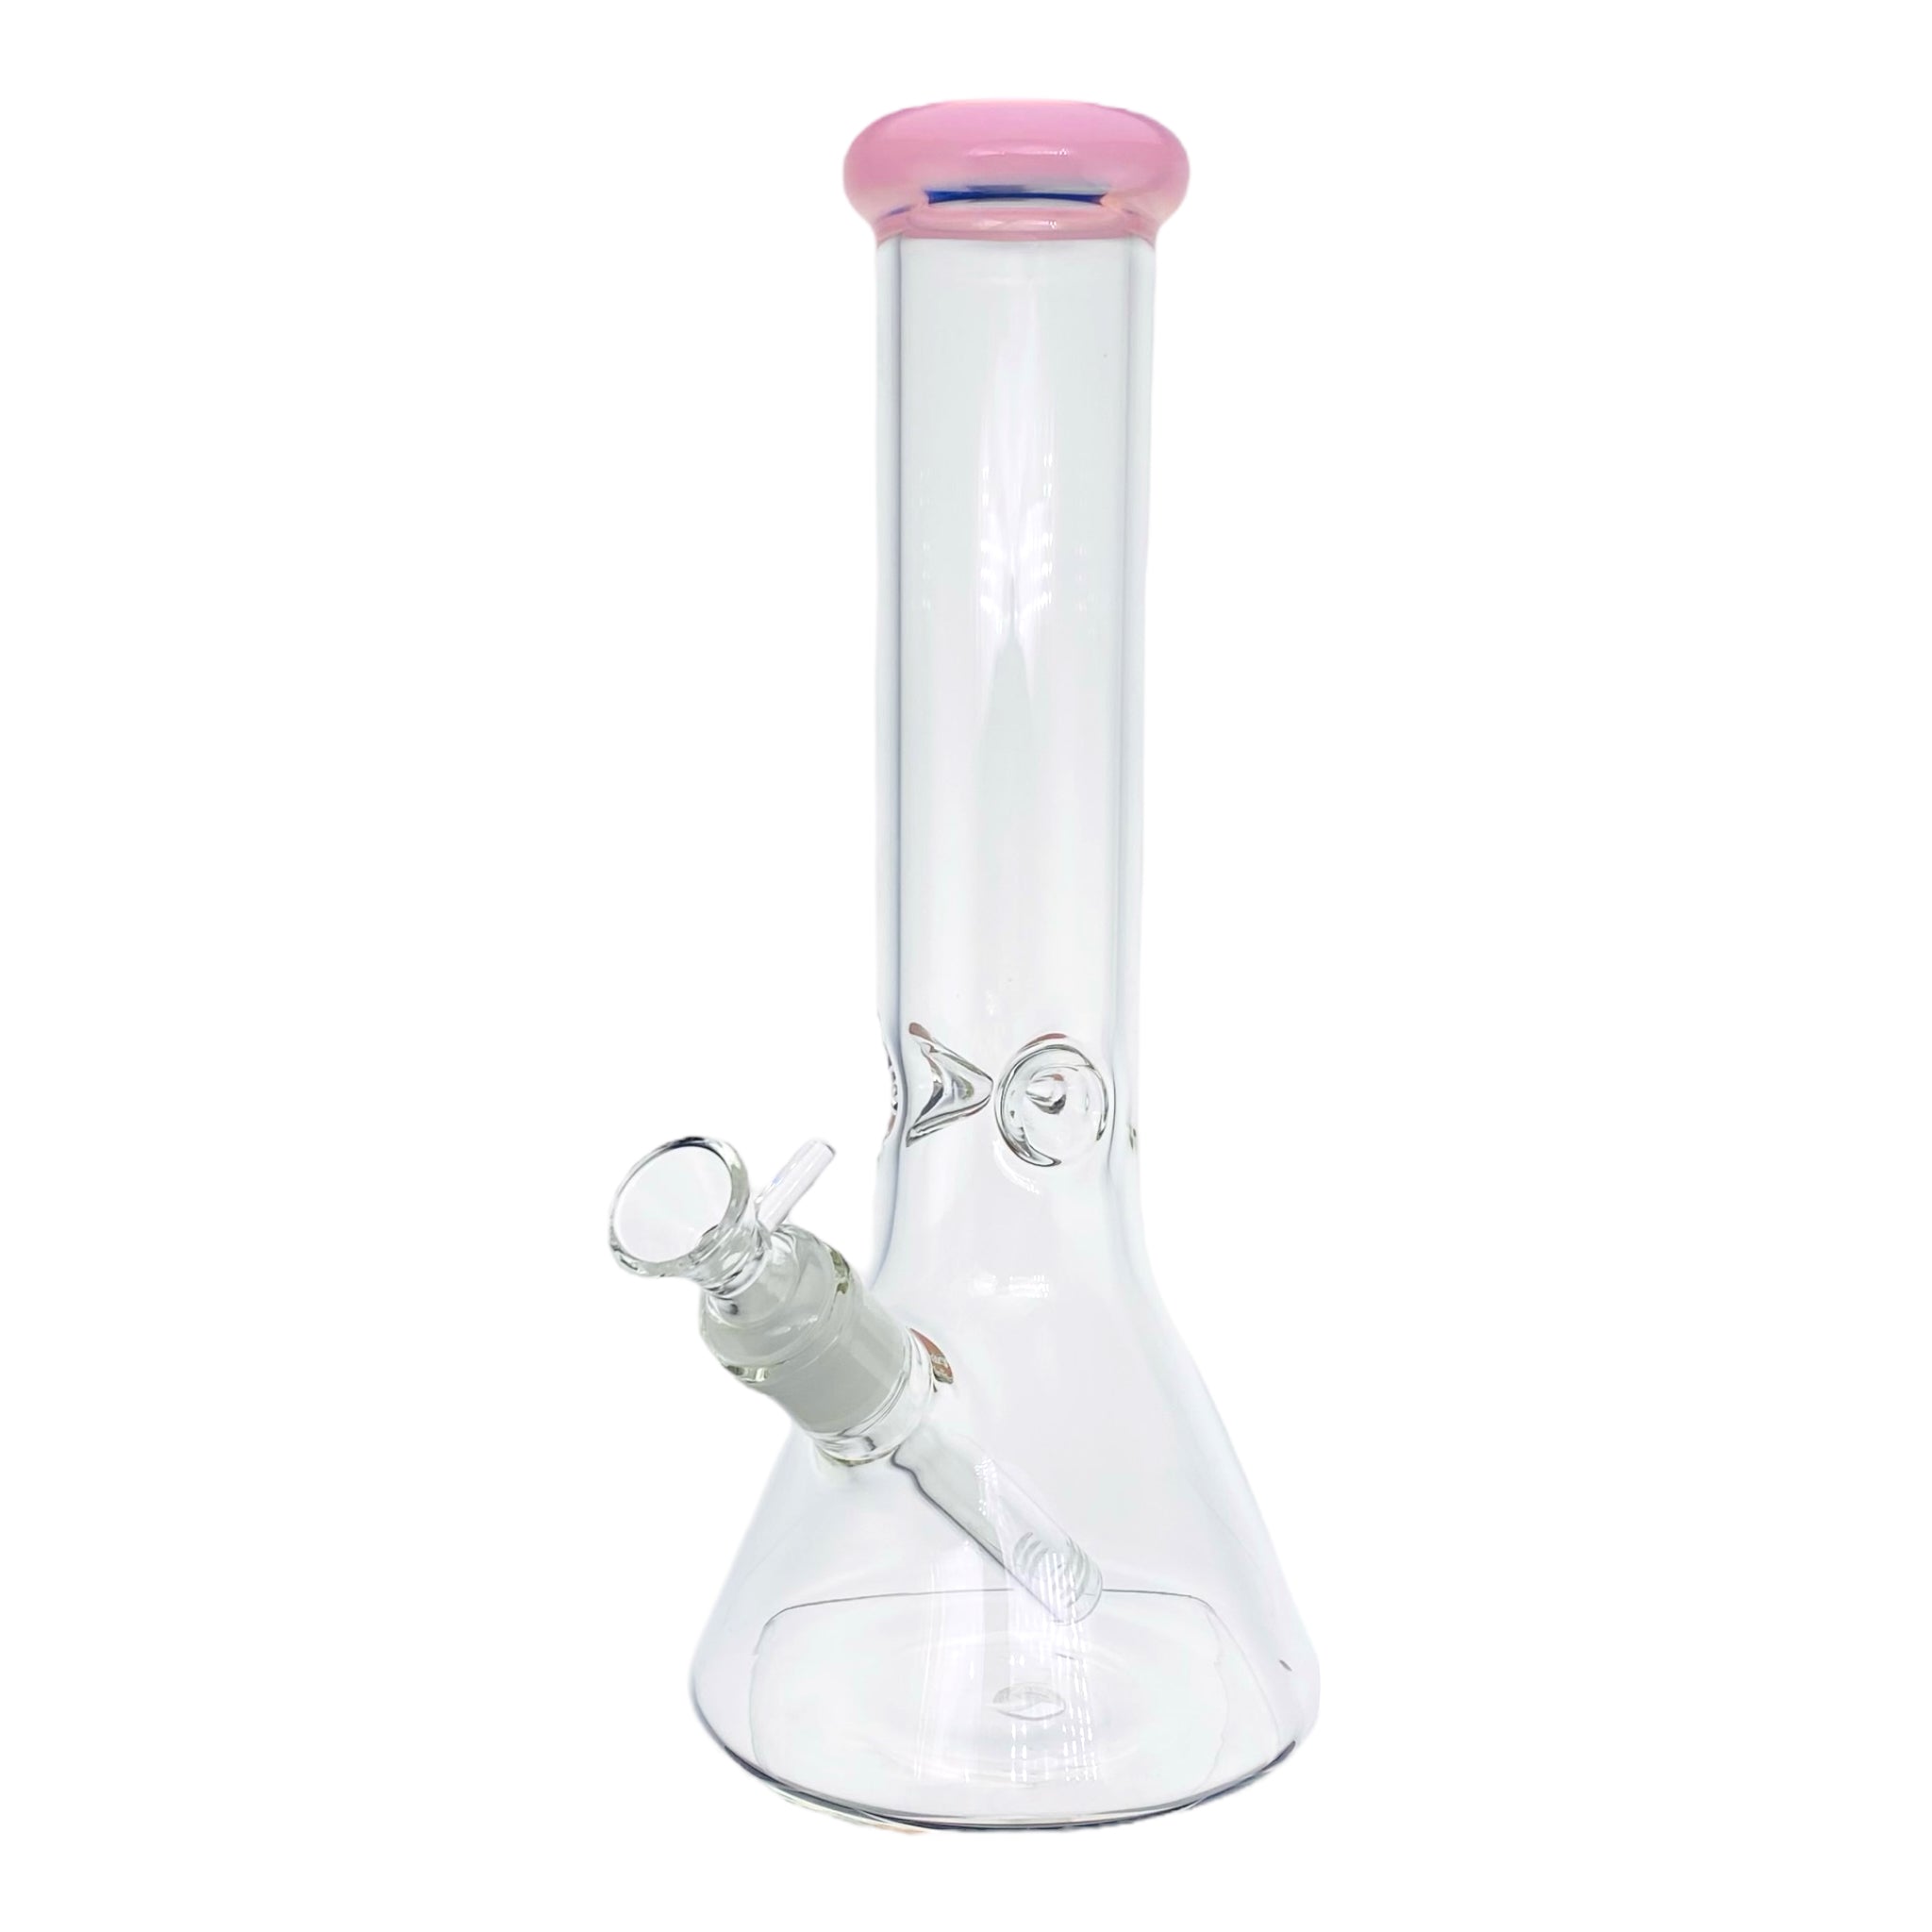 selection of cute and girly pink bongs dab rigs hand pipes and smoking accessories